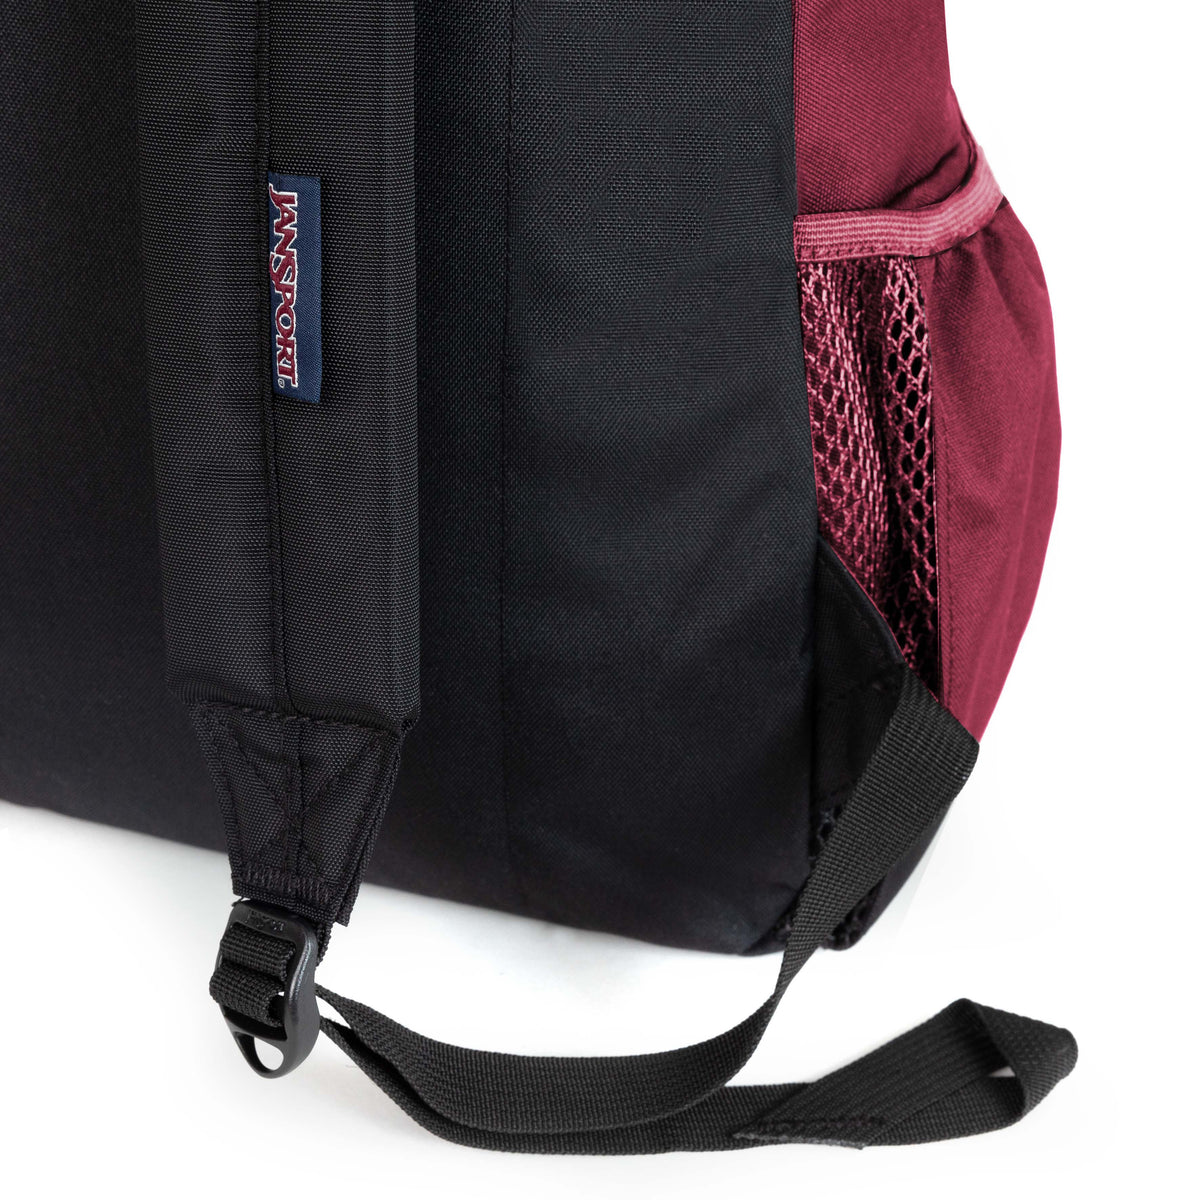 Jansport Cross Town Backpack - Russet Red